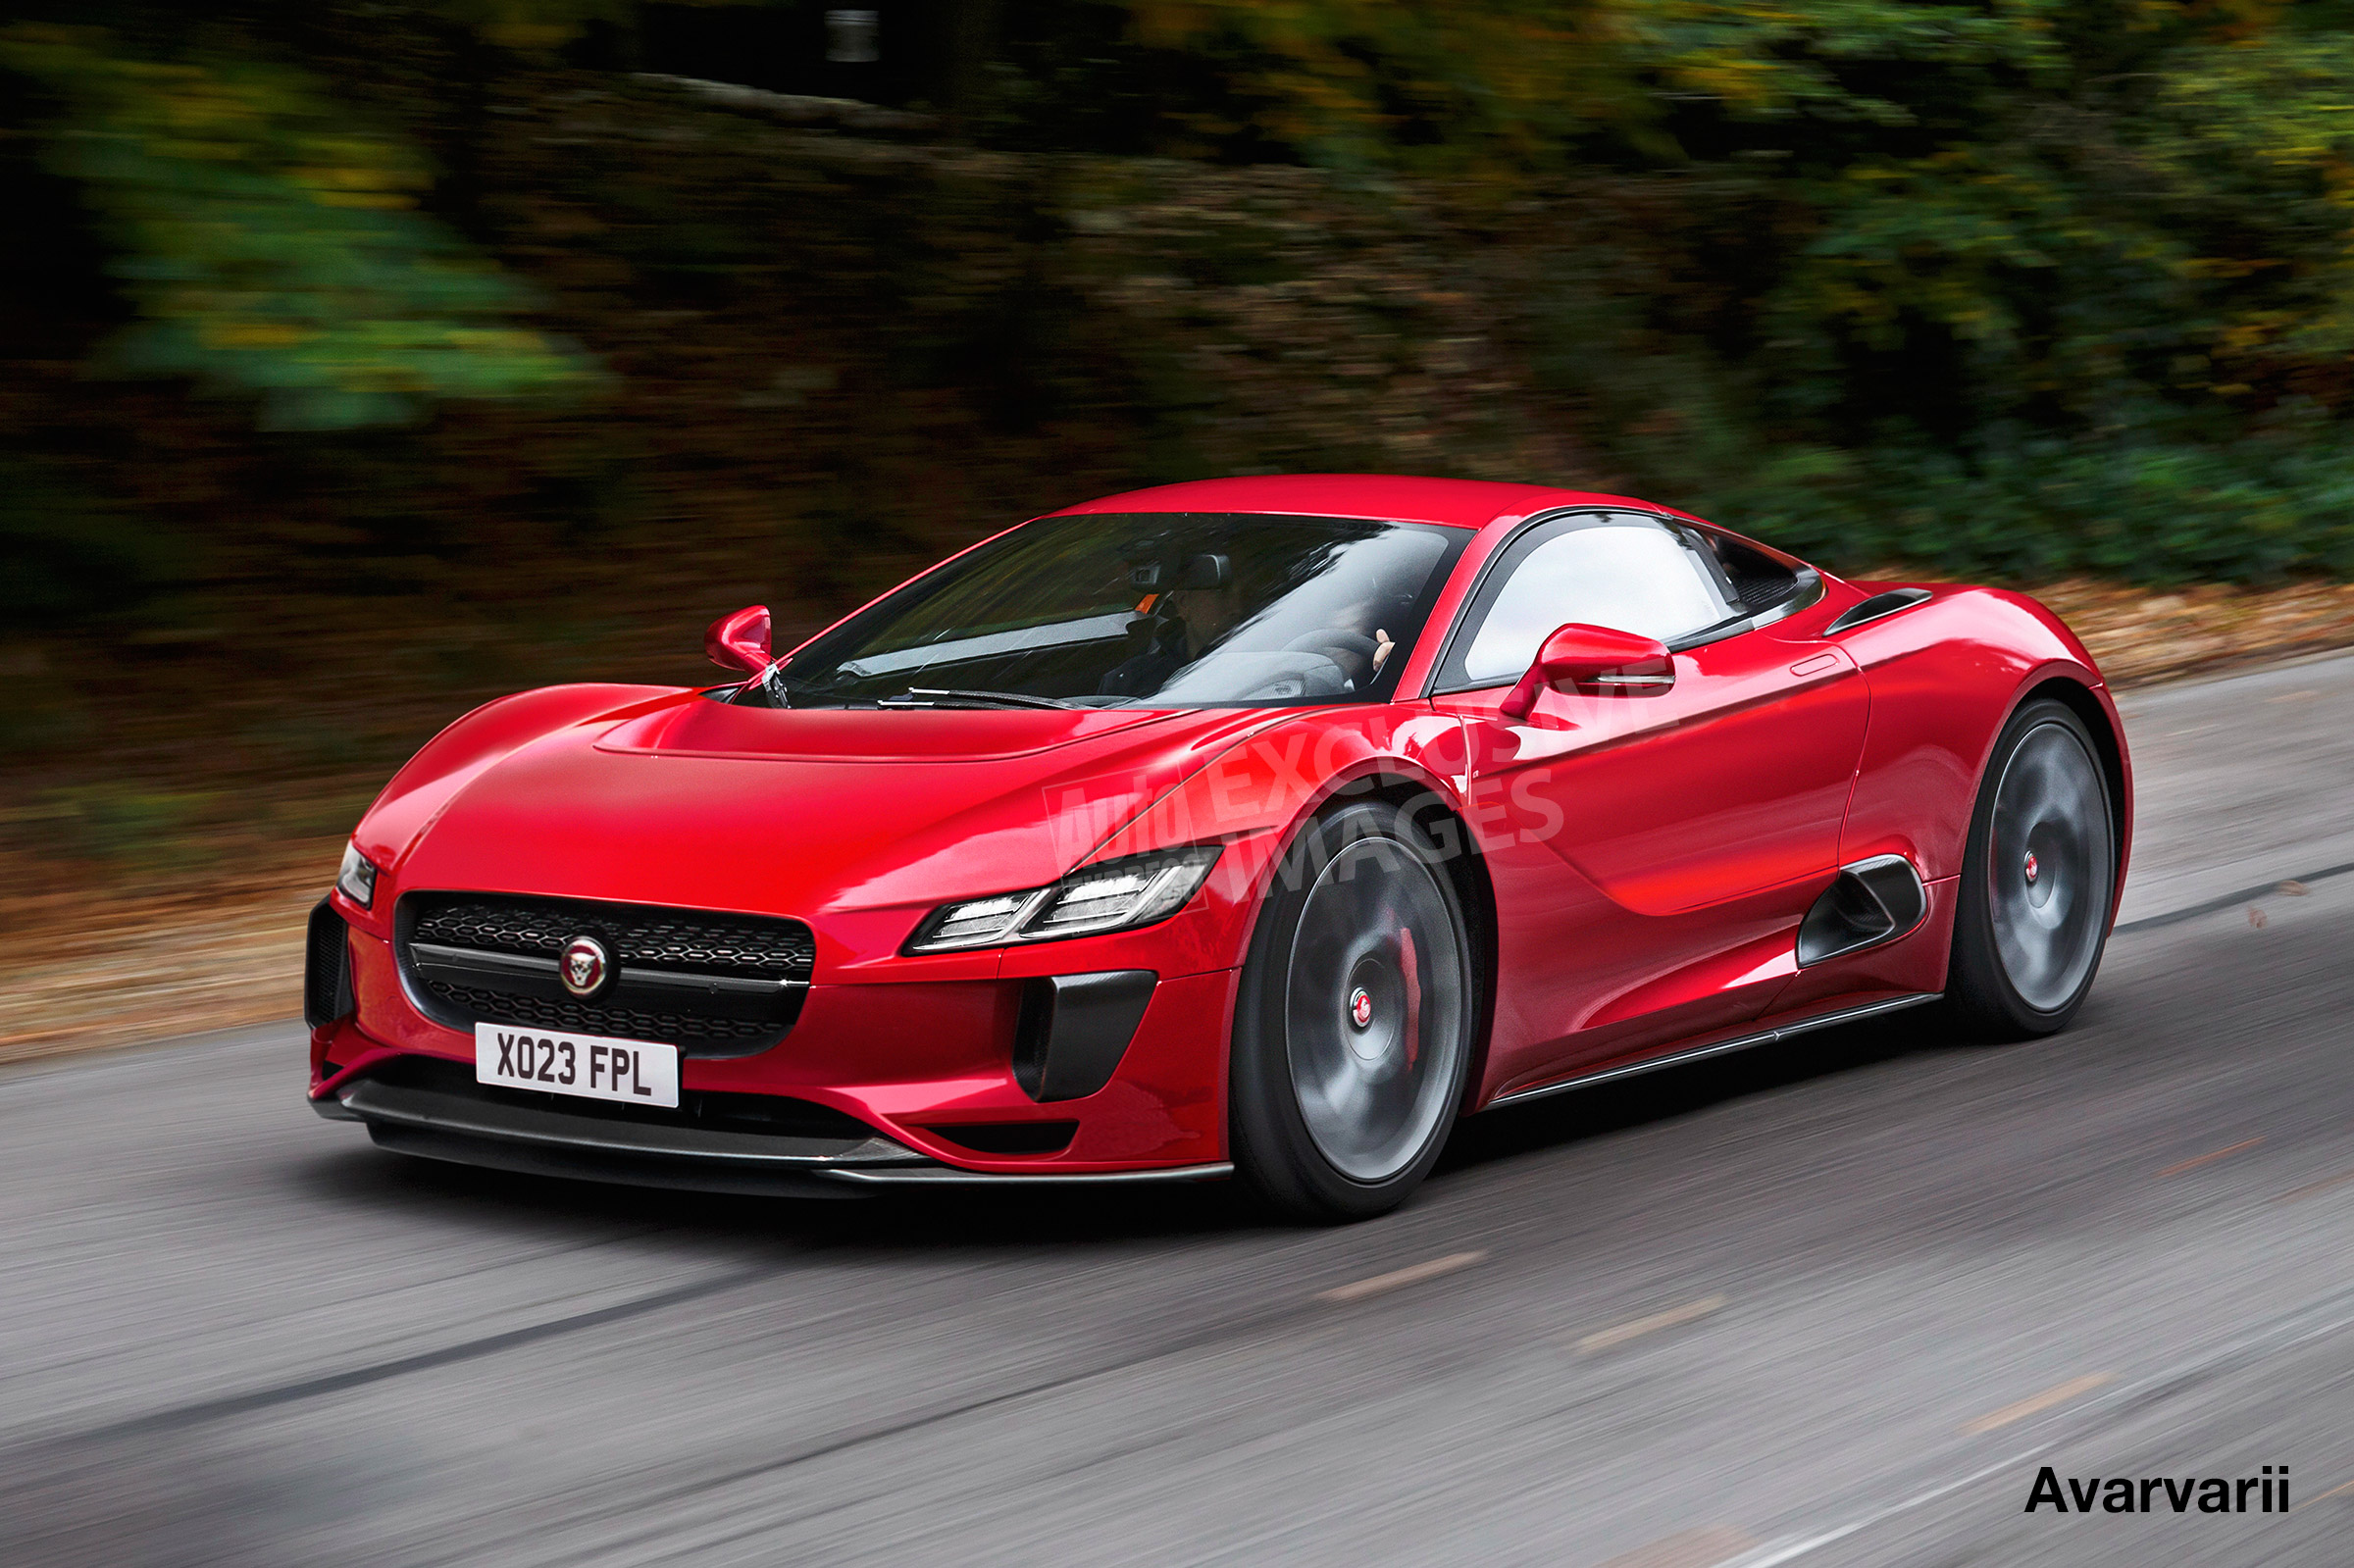 New mid-engined 2022 Jaguar F-Type to rival McLaren | Auto ...